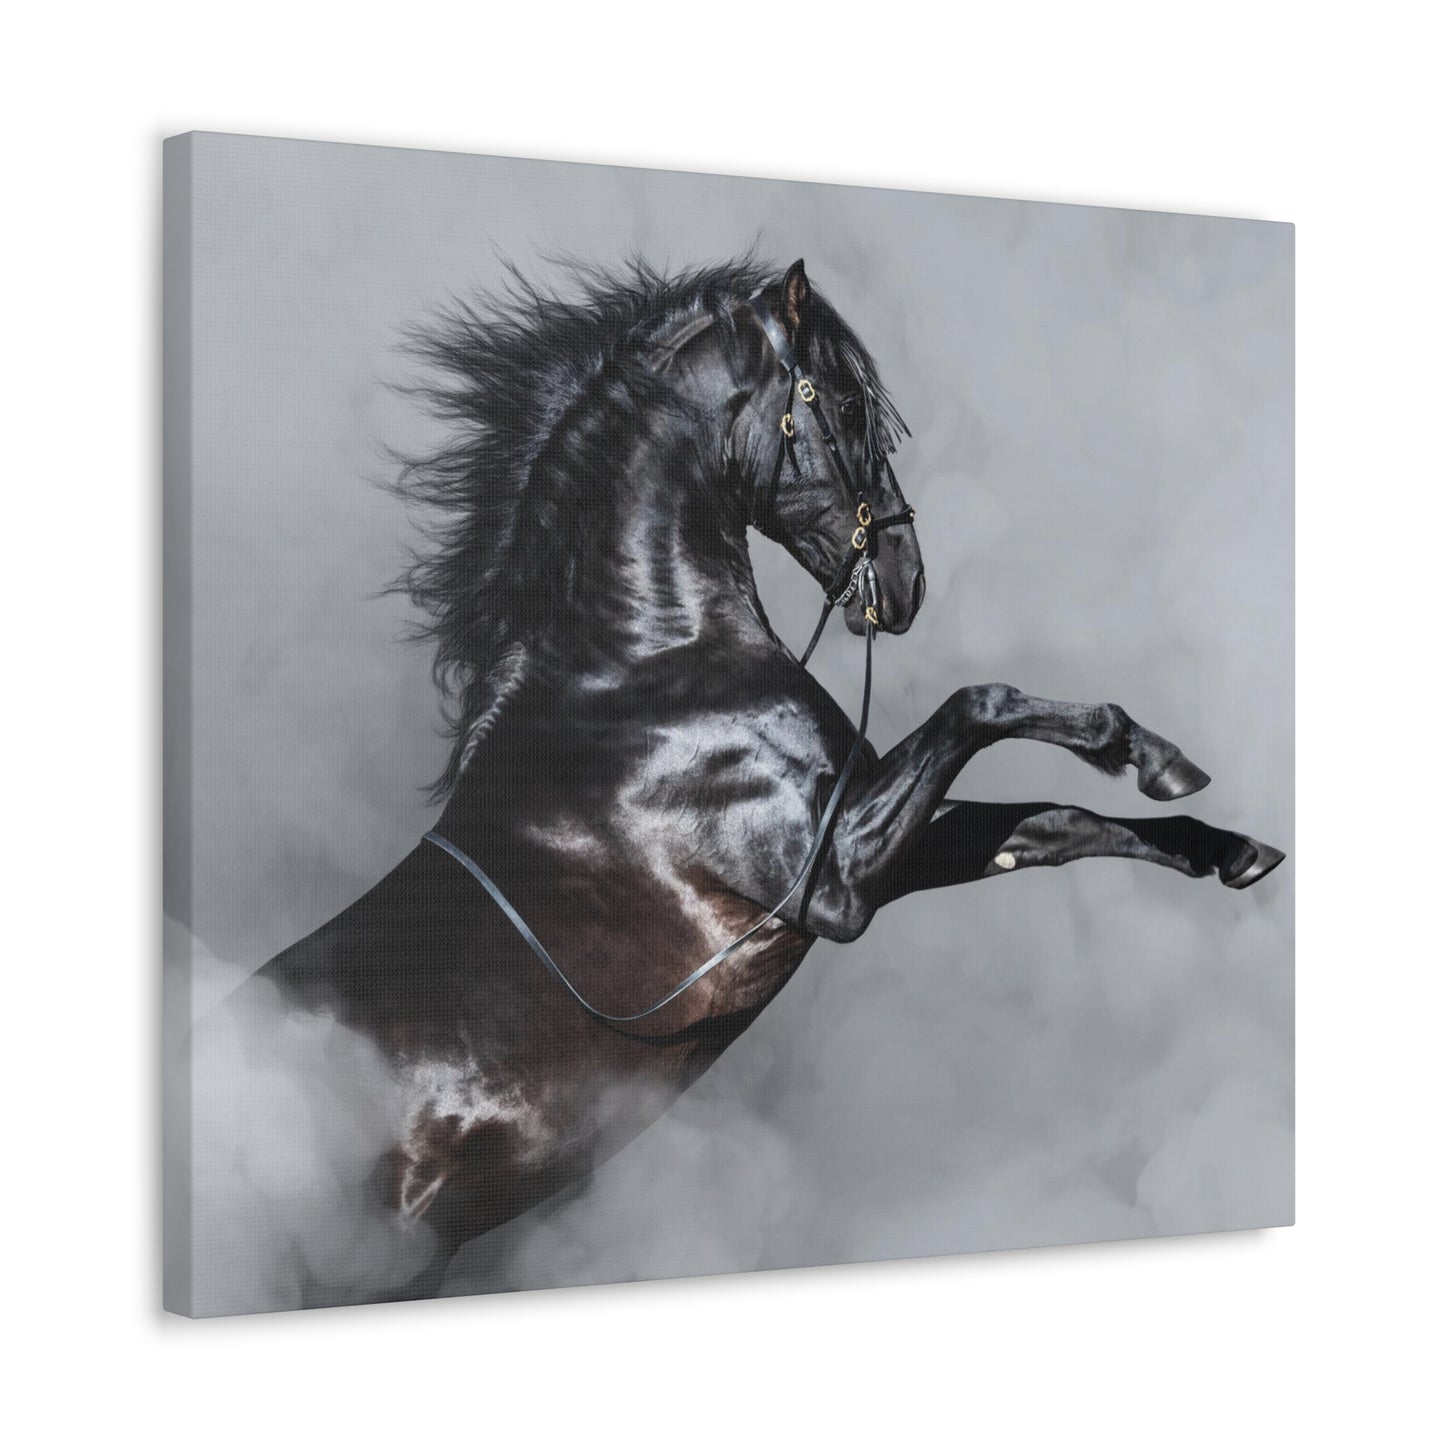 Black Horse rearing in Fog - Canvas